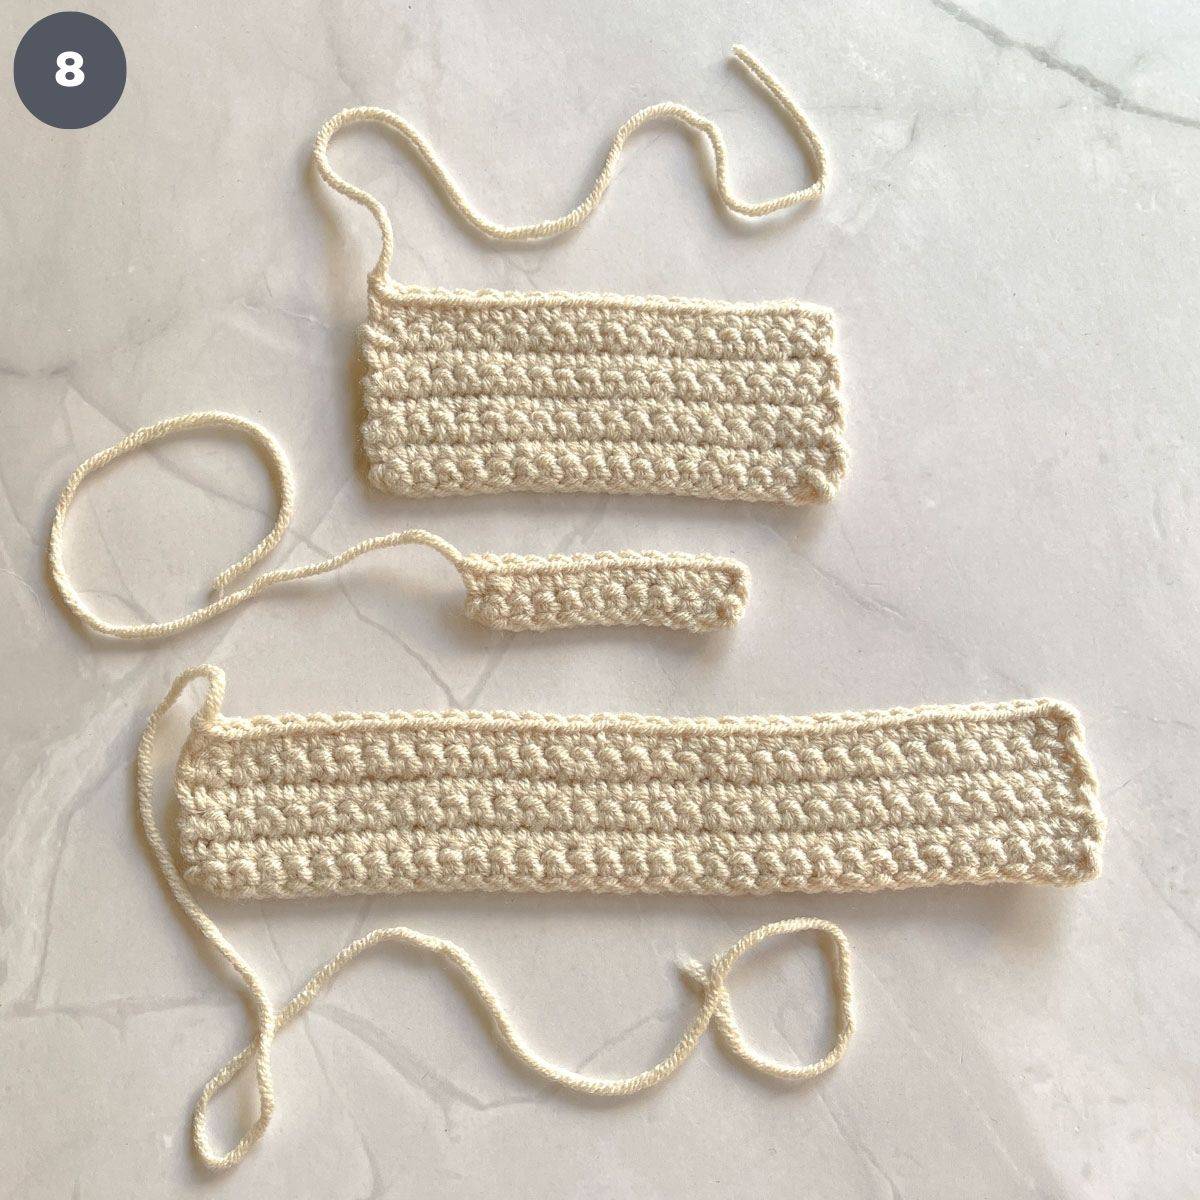 3 pieces of crocheted rectangle.